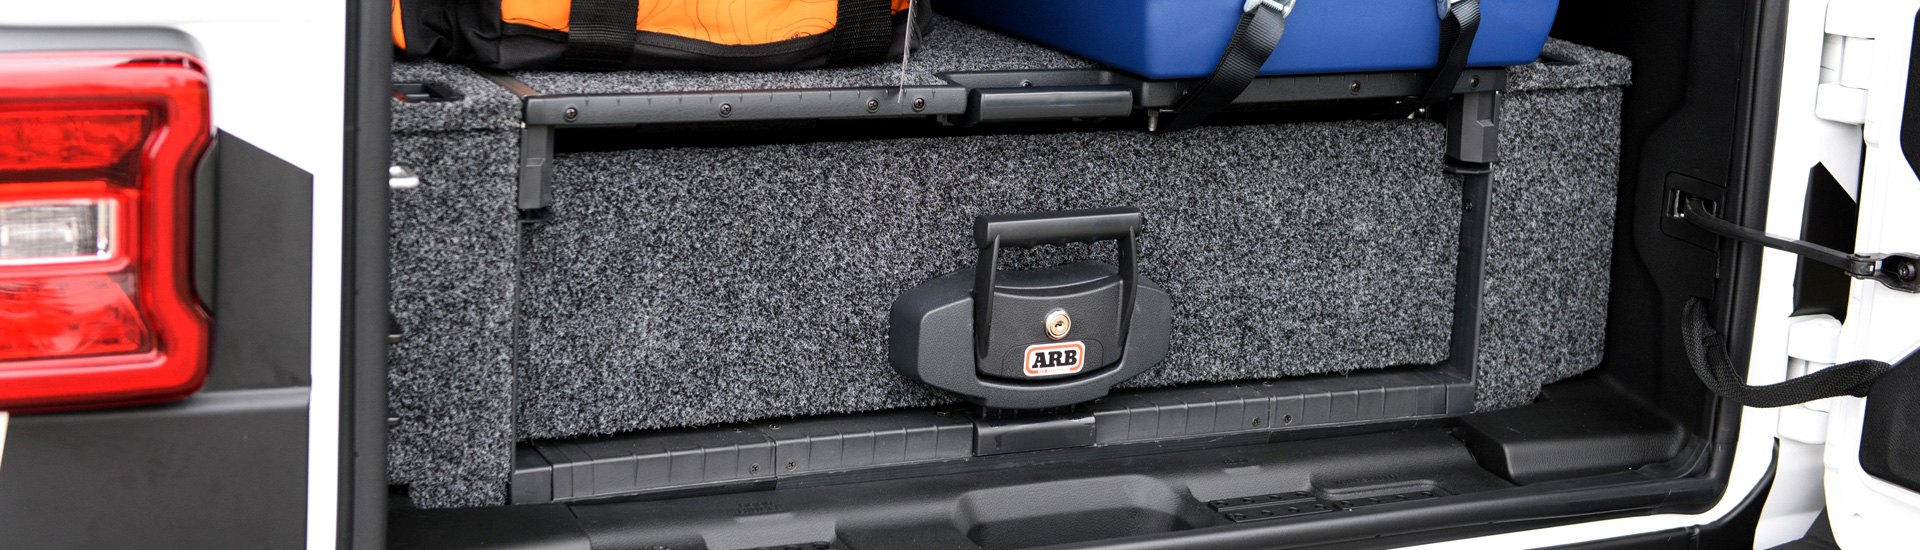 Maximize Your JL’s Storage Space With ARB Modular Roller Drawer System